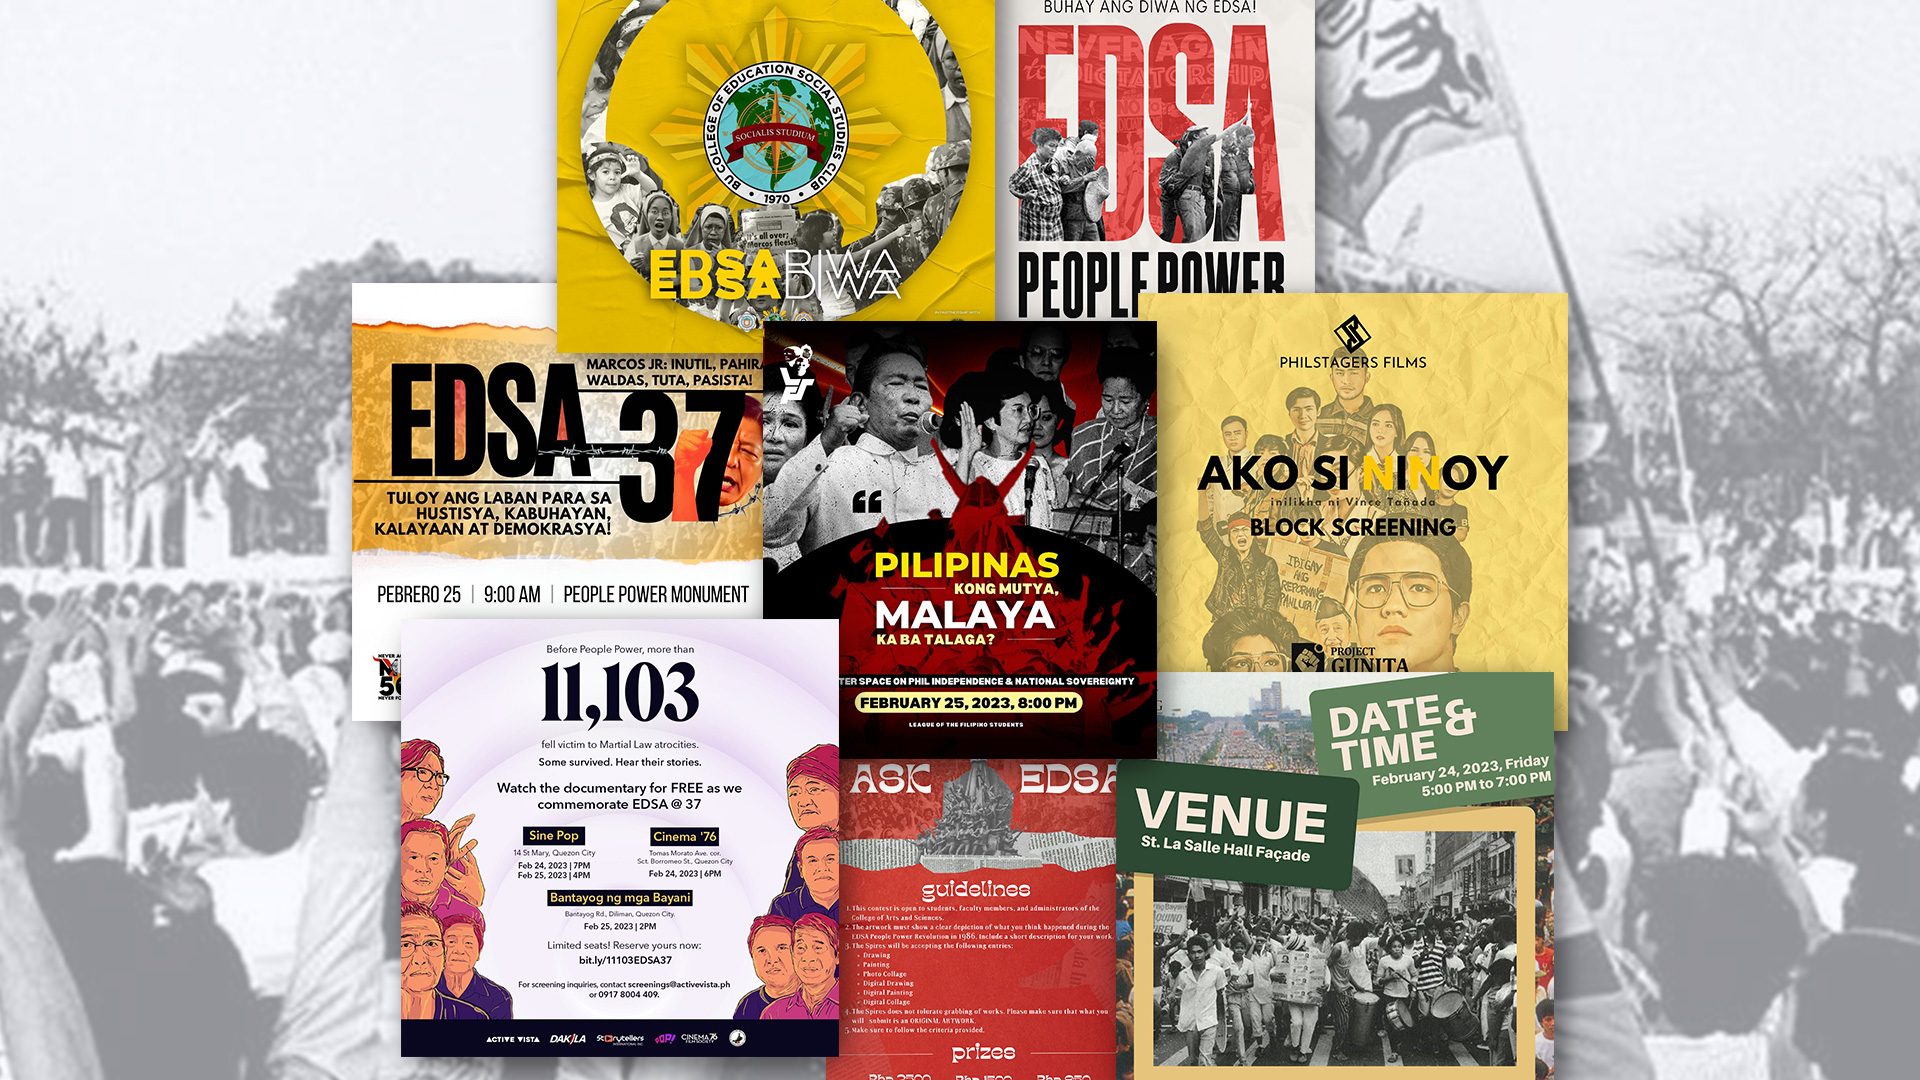 LIST: Protests and activities to commemorate 37th People Power anniversary